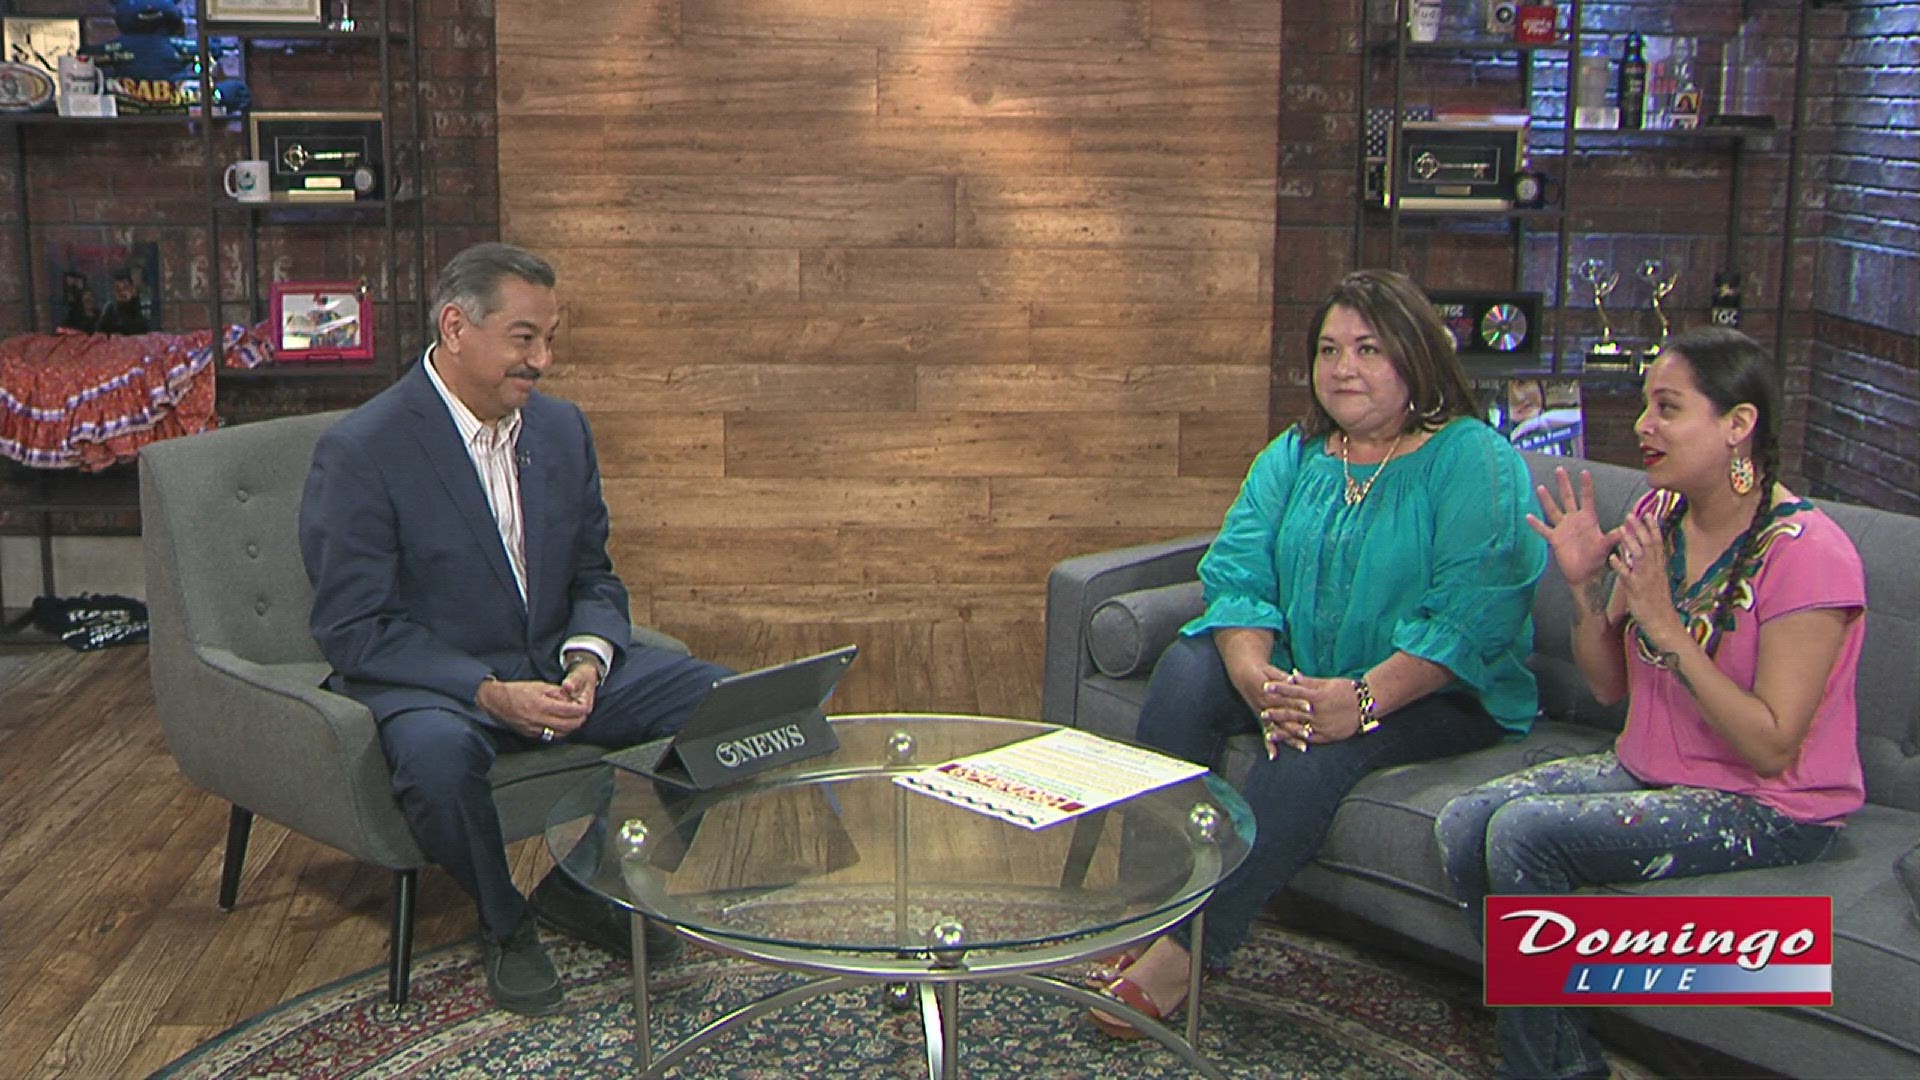 The Garcia Arts & Education Center joined us on Domingo Live to invite the community to celebrate its 25th Anniversary with a Pachanga Sept.  14.